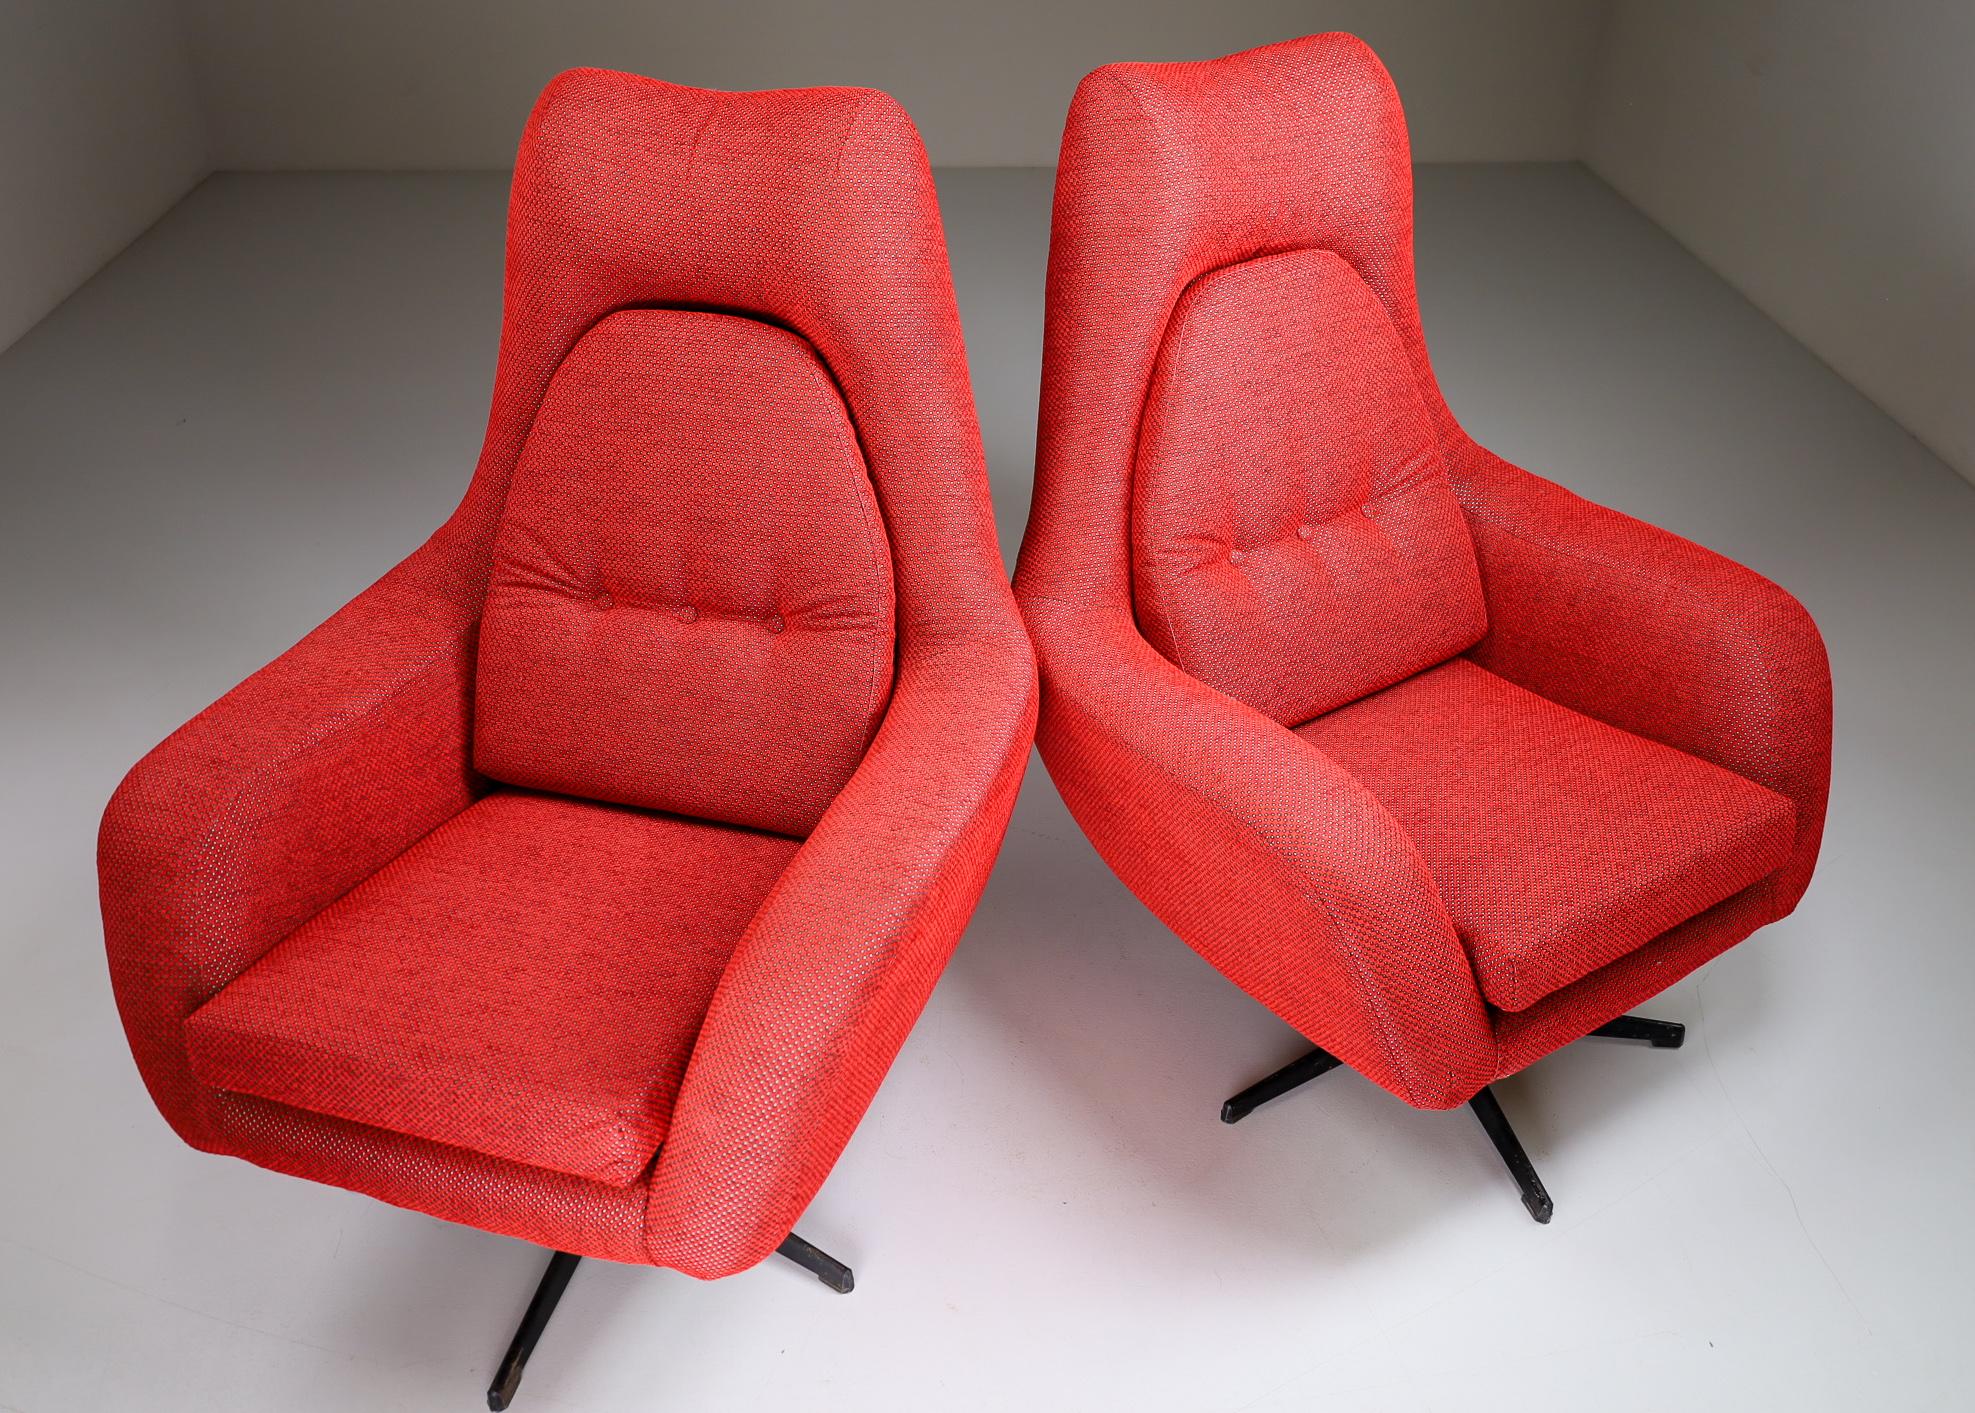 Late 20th Century Pair of Swivel Chairs in New Reupholstered Red Fabric, Czech Republic 1970 For Sale